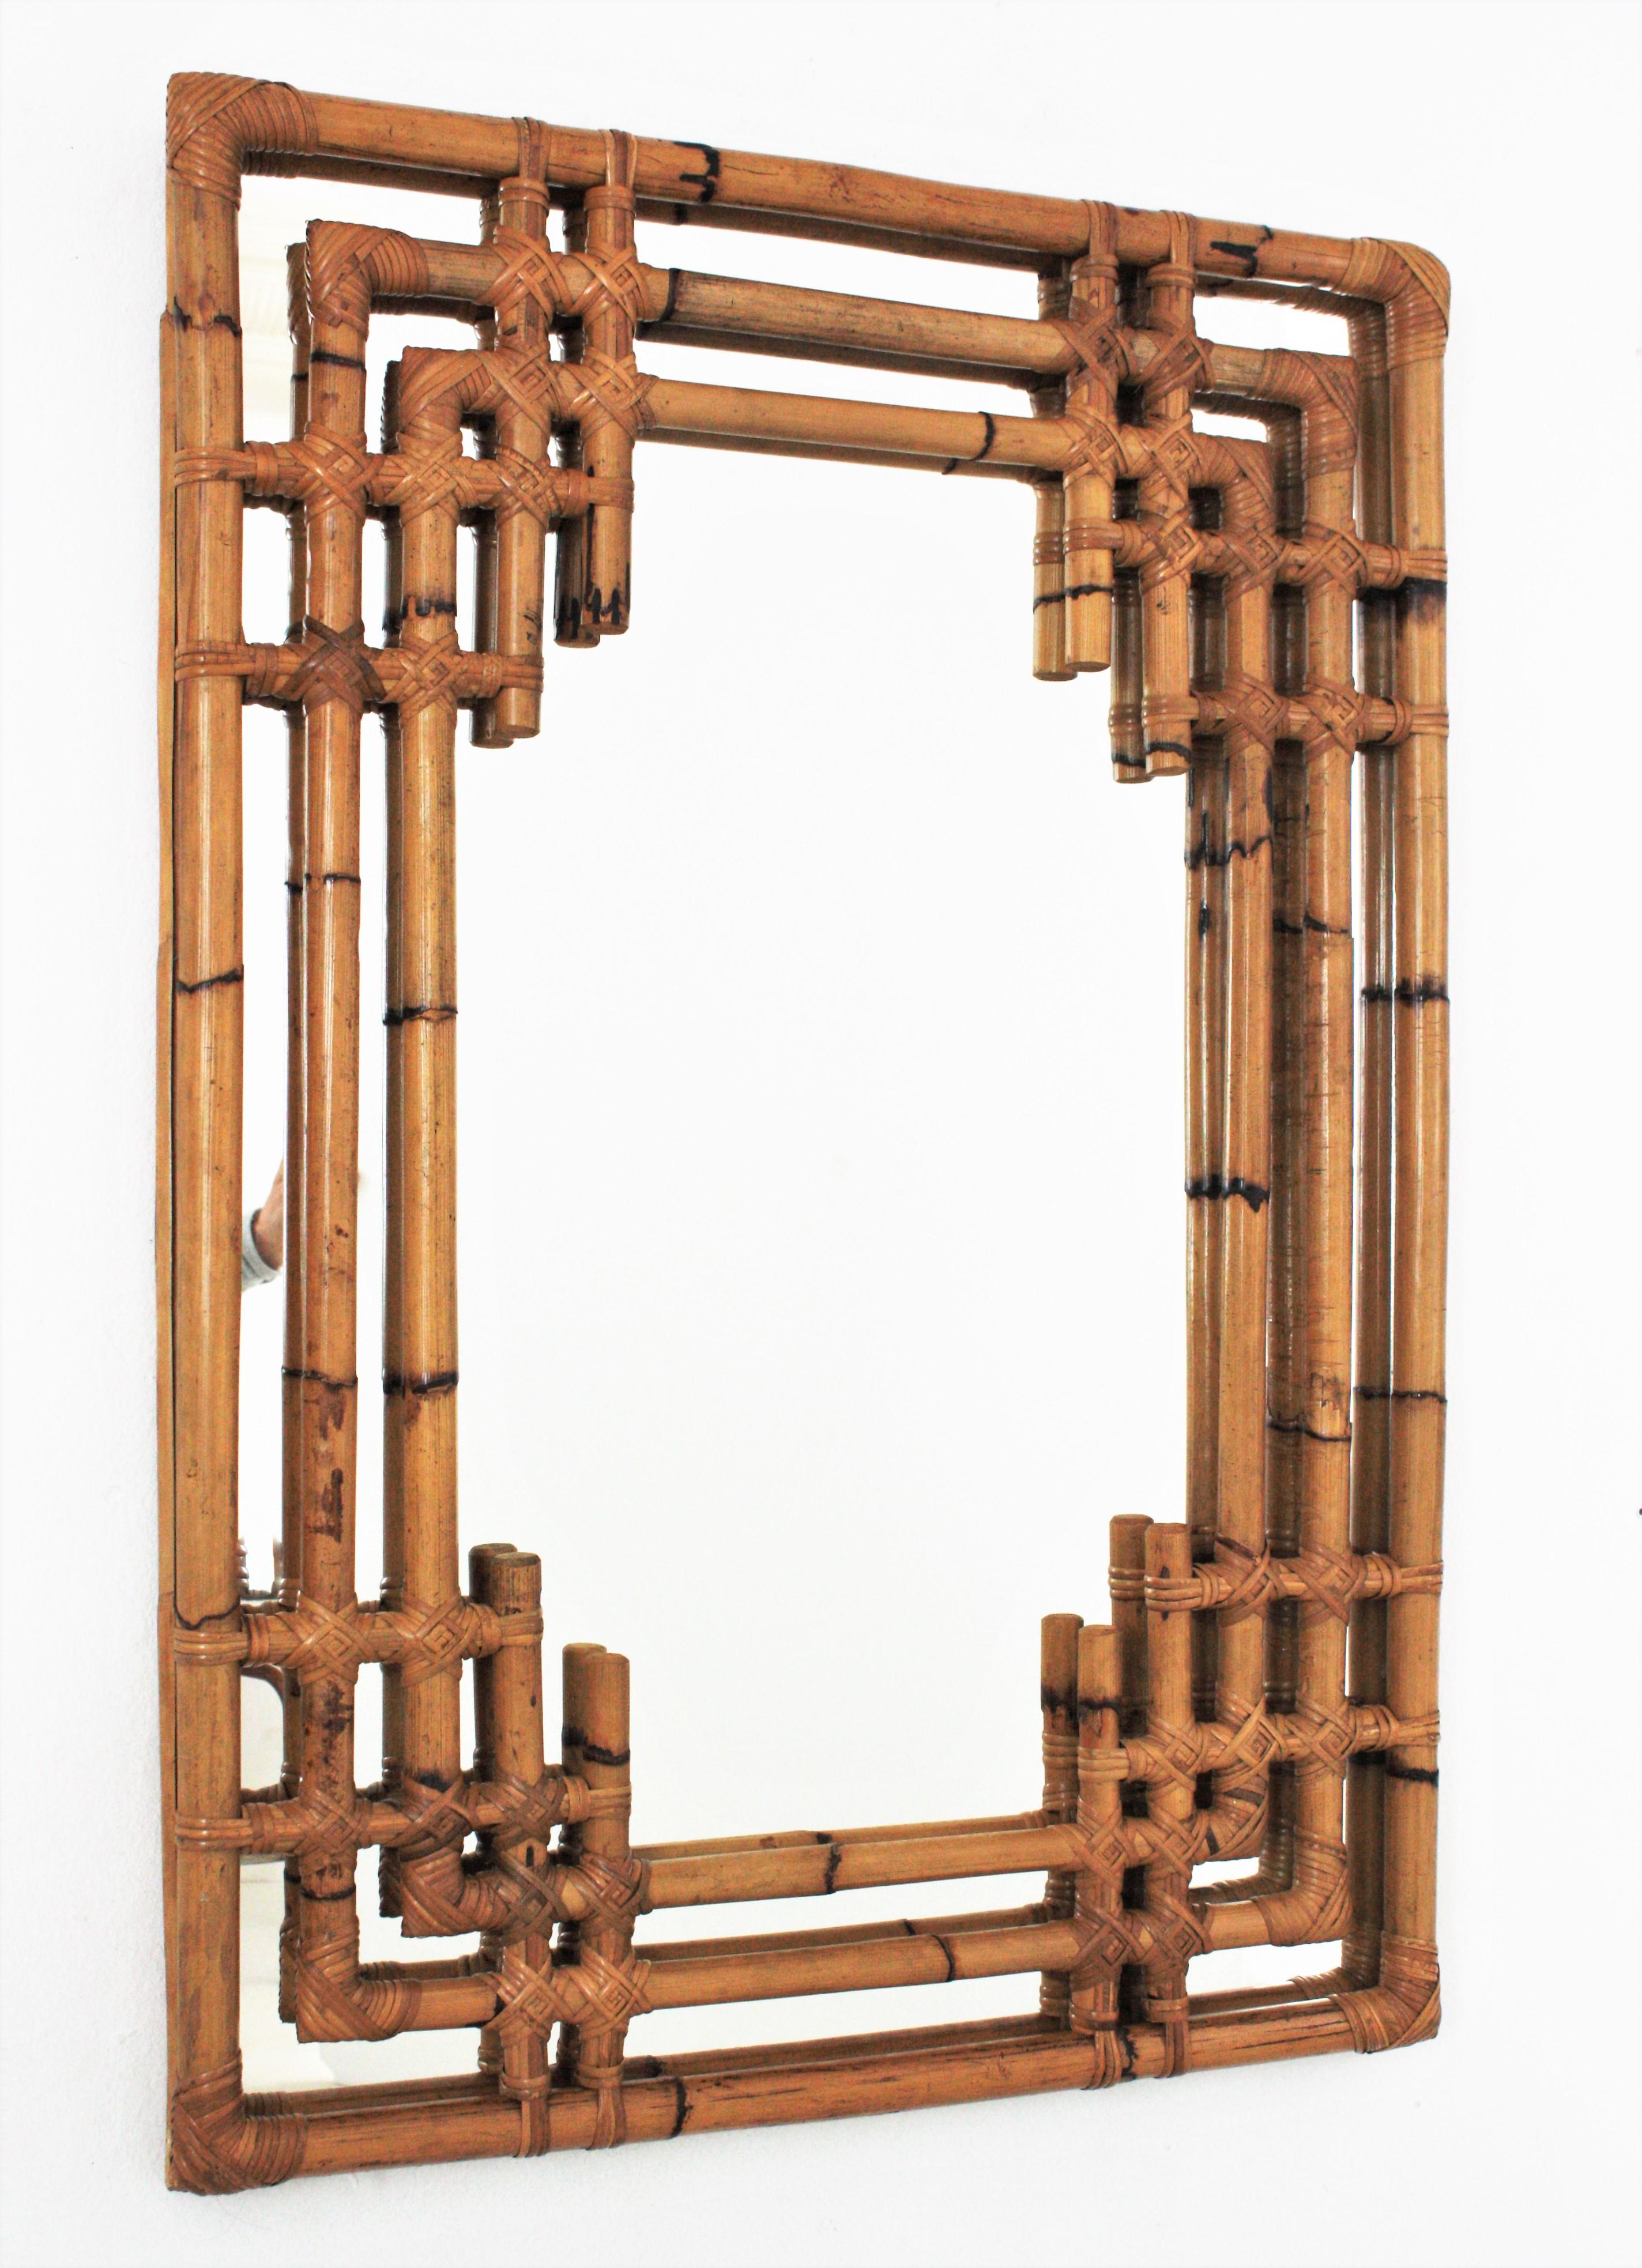 Spanish Mid-Century Modern Bamboo Chinoiserie Tiki style rectangular wall mirror. Spain, 1960s.
Gorgeous Tiki style rectangular mirror handcrafted with bamboo canes. It has a highly decorative frame with oriental inspired geometric decorations and a